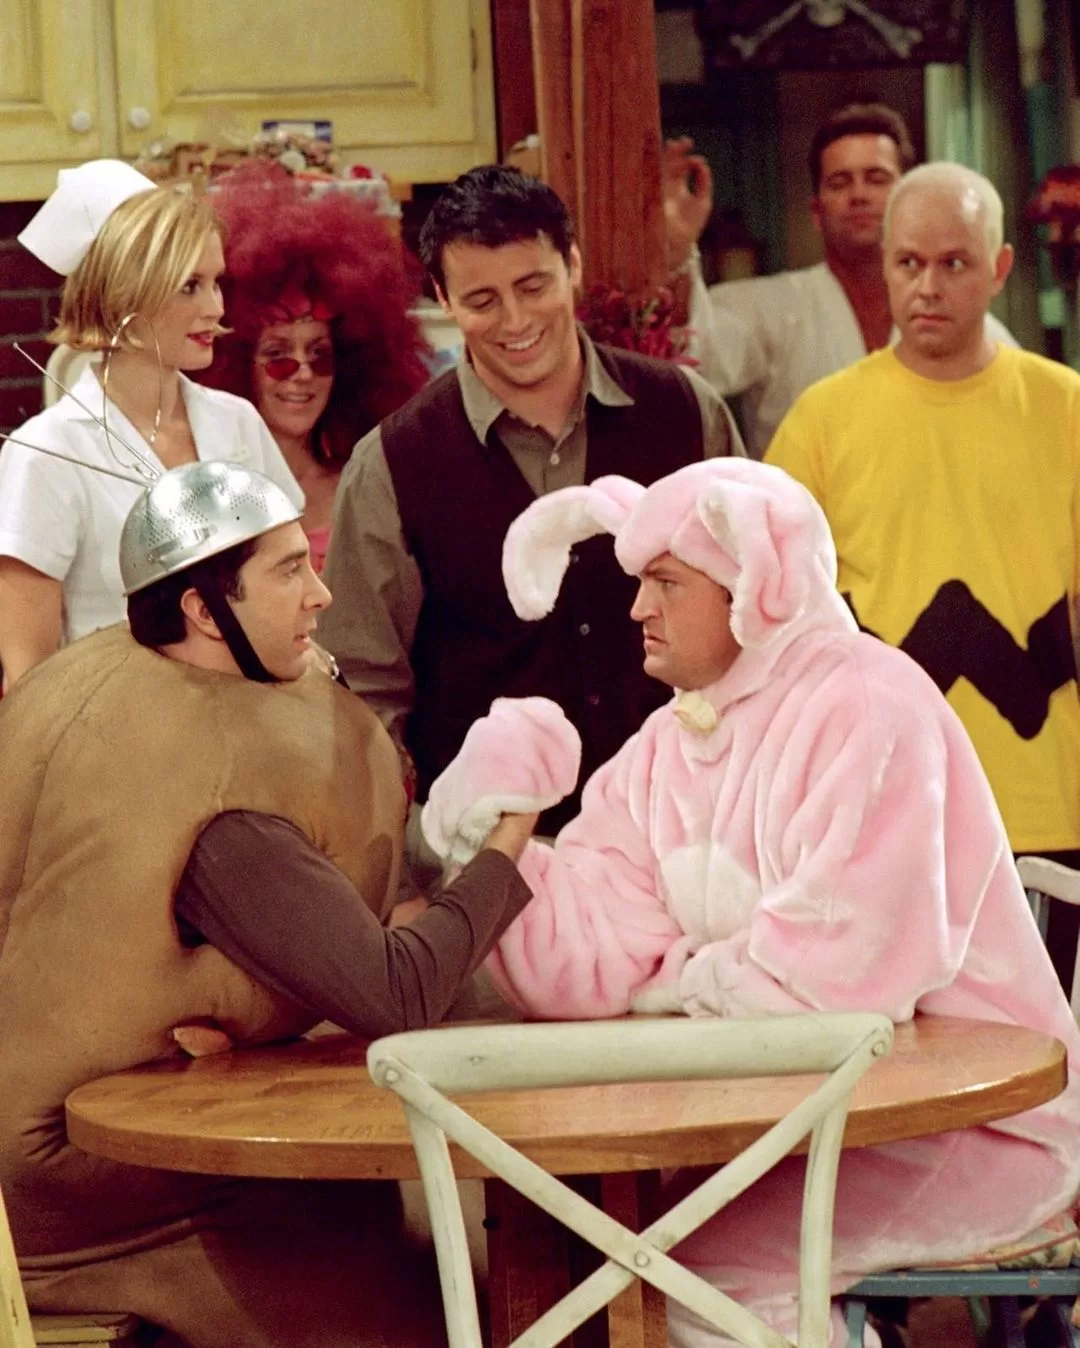 A scene from the sitcom Friends